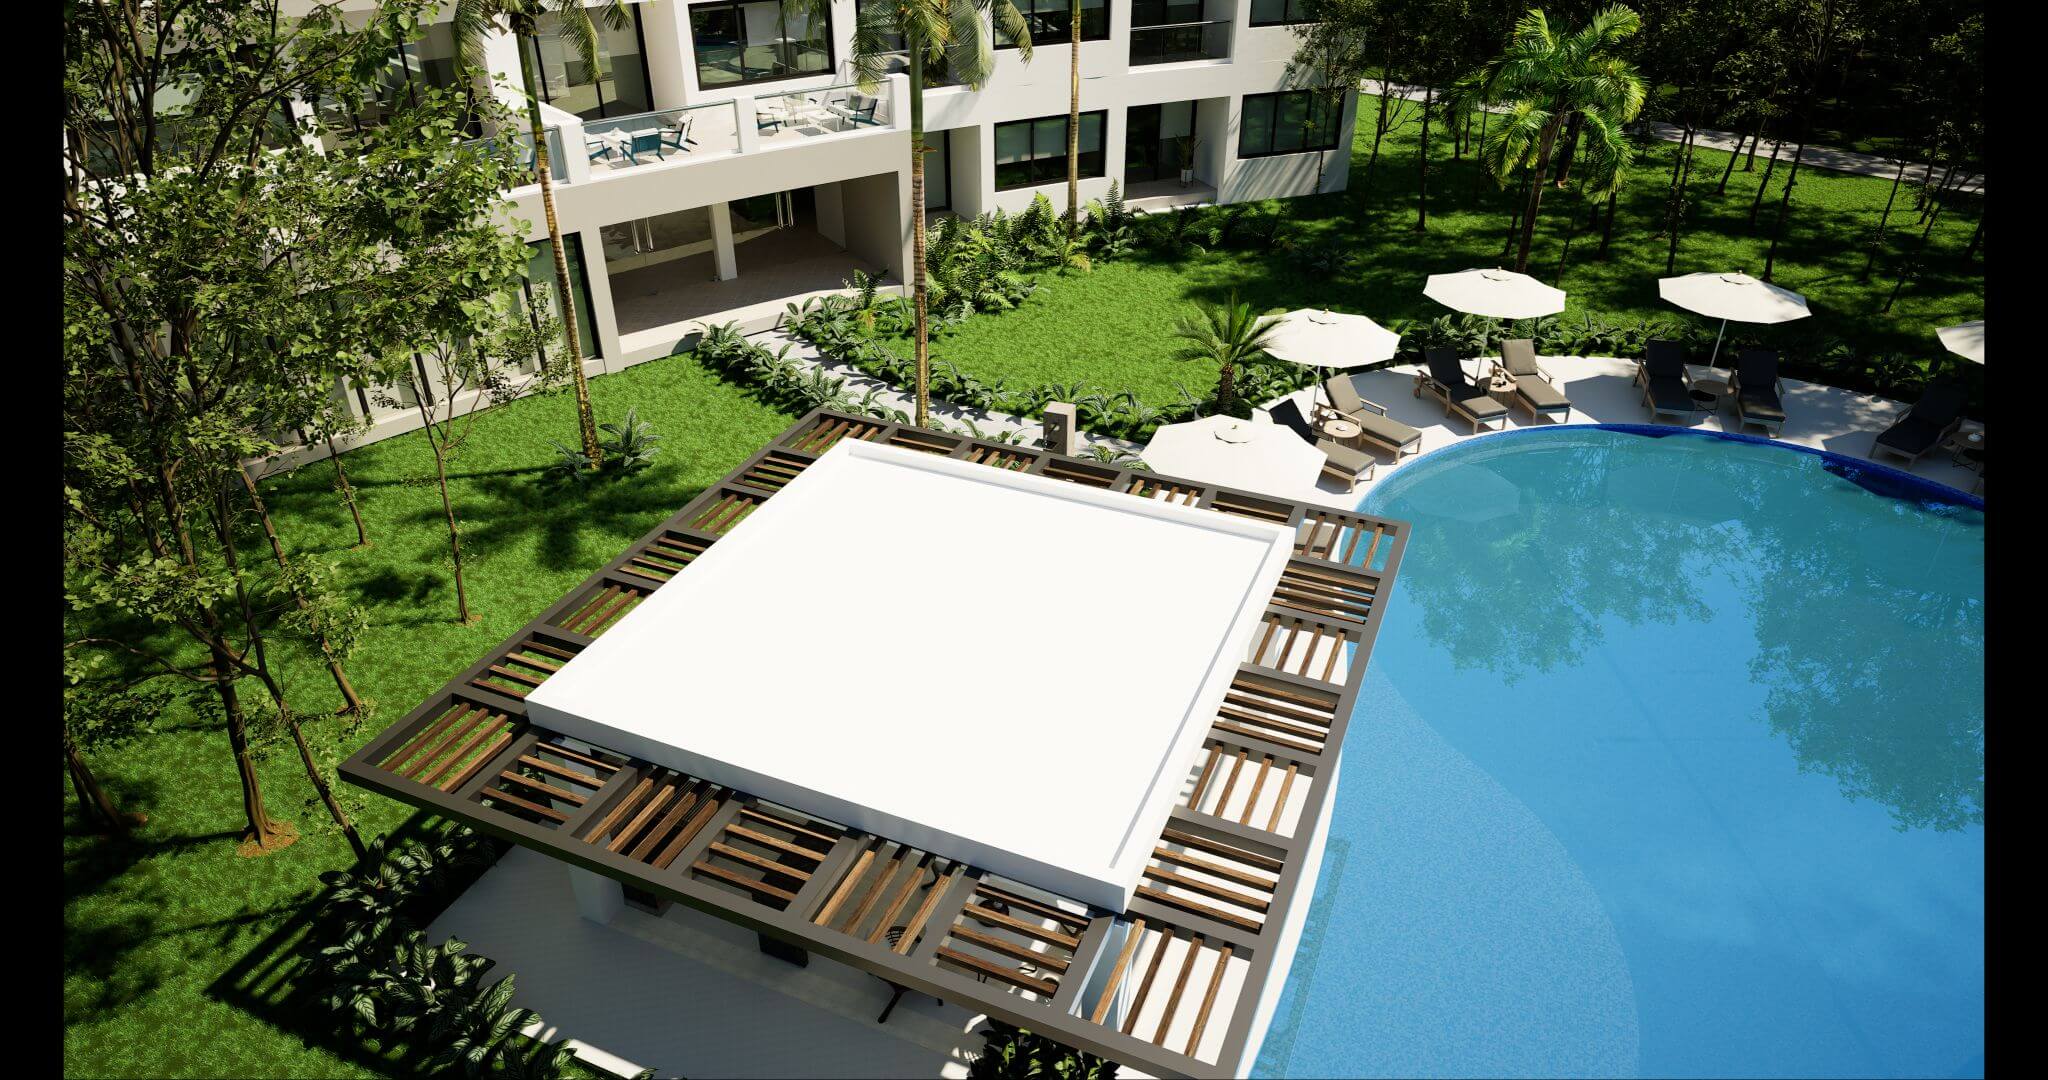 Apartment in Playacar, with 4 pools, playground for children, Pet zone, gym, clubhouse, restaurant, terrace bar, concierge and more, for sal